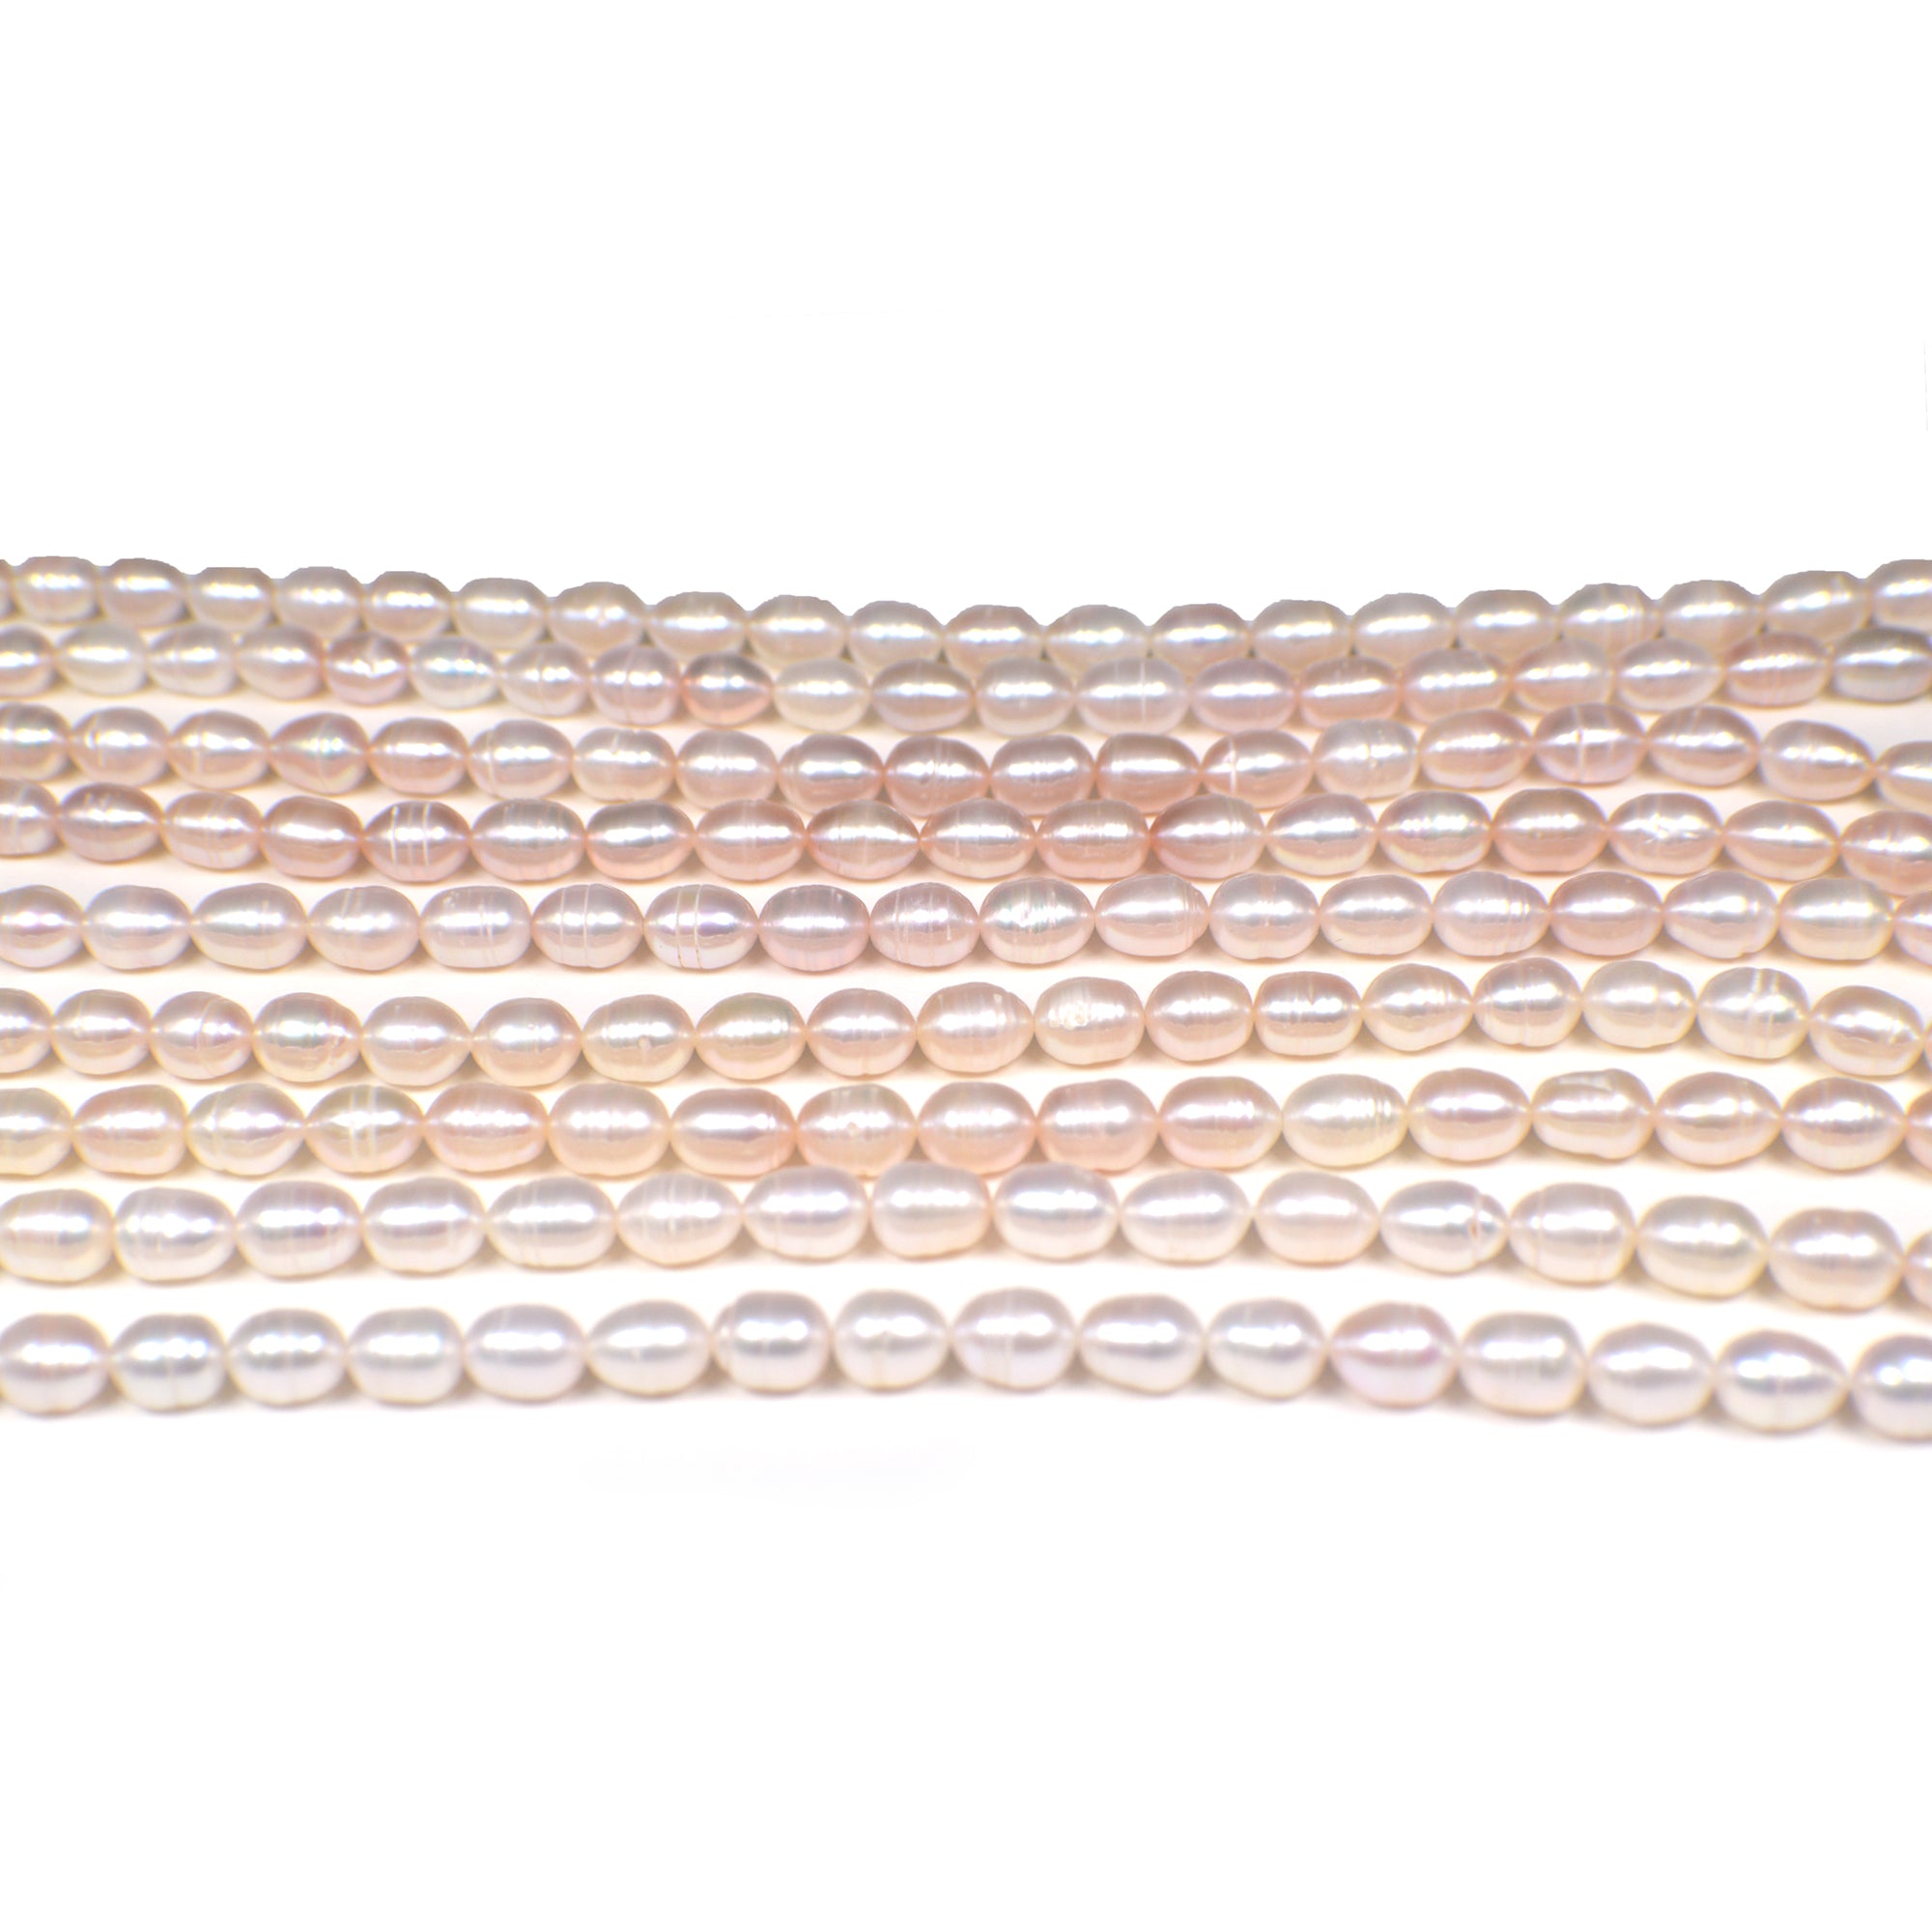 8x6 - 9x6 MM Pink Peach Ringed Rice Freshwater Pearls Beads